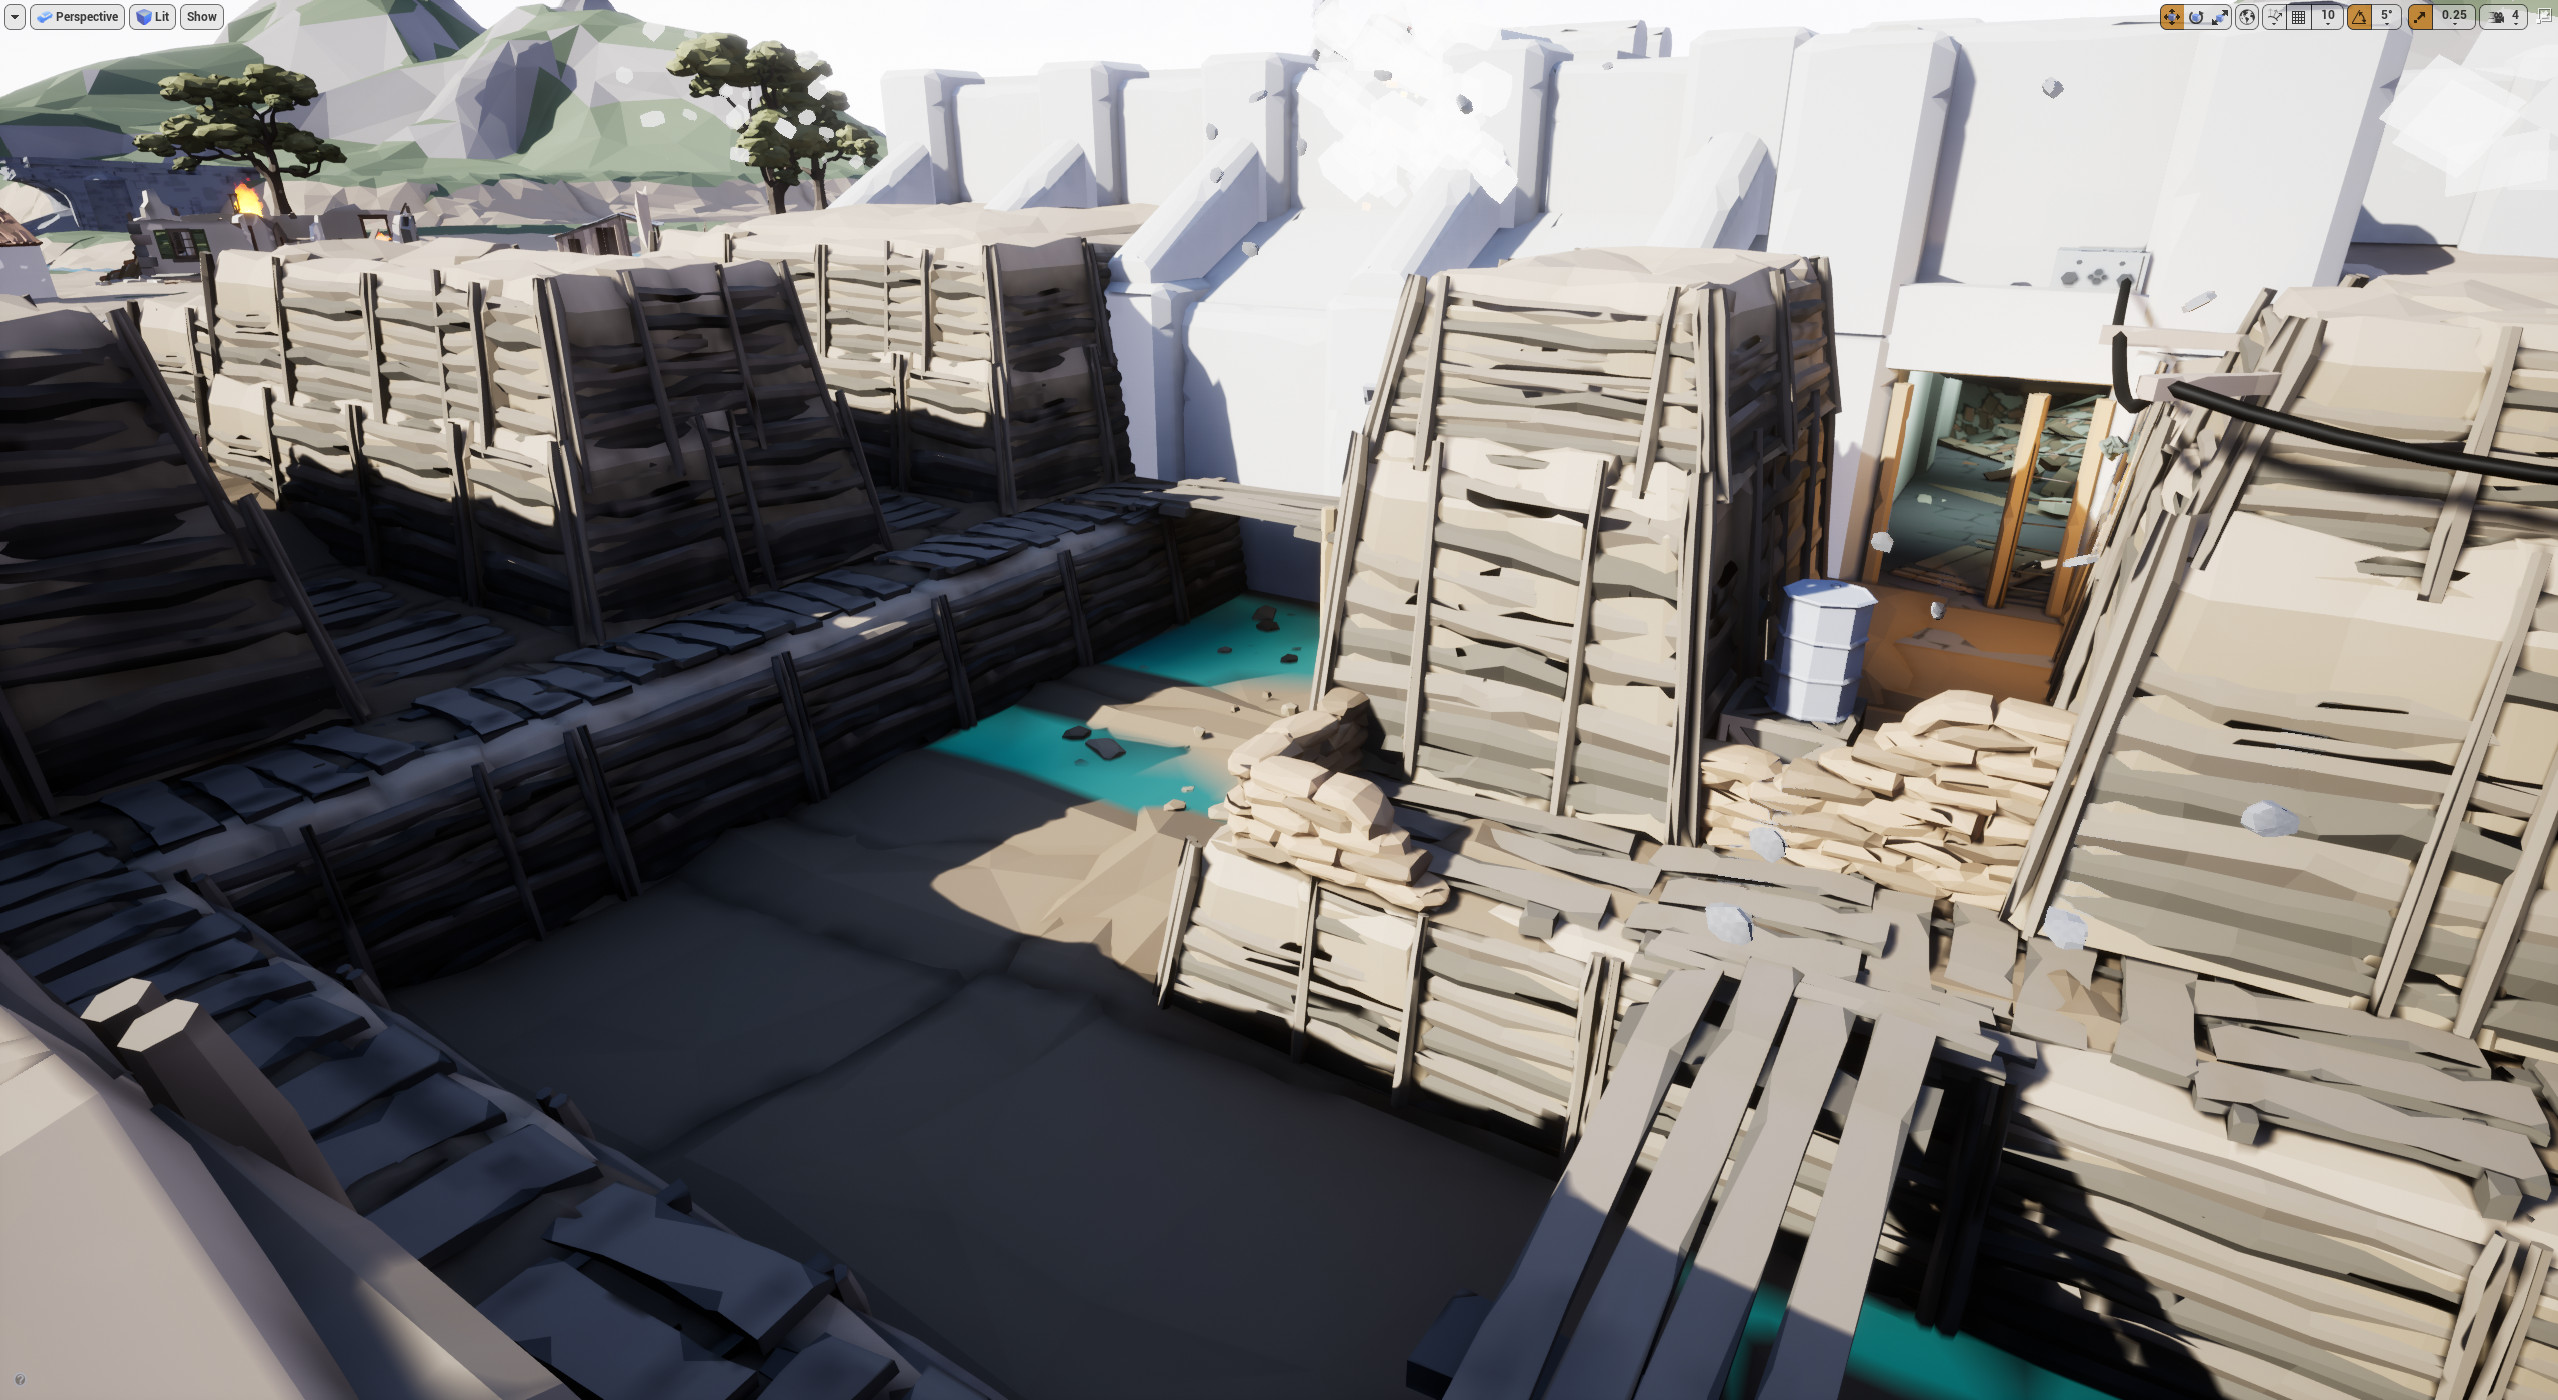 Most of the exterior trench sections have two stories of height, the pit area in the center and the flanking ledges. The player frequently needs to loop around the trenches to reach the various areas allowing the space to be reused.